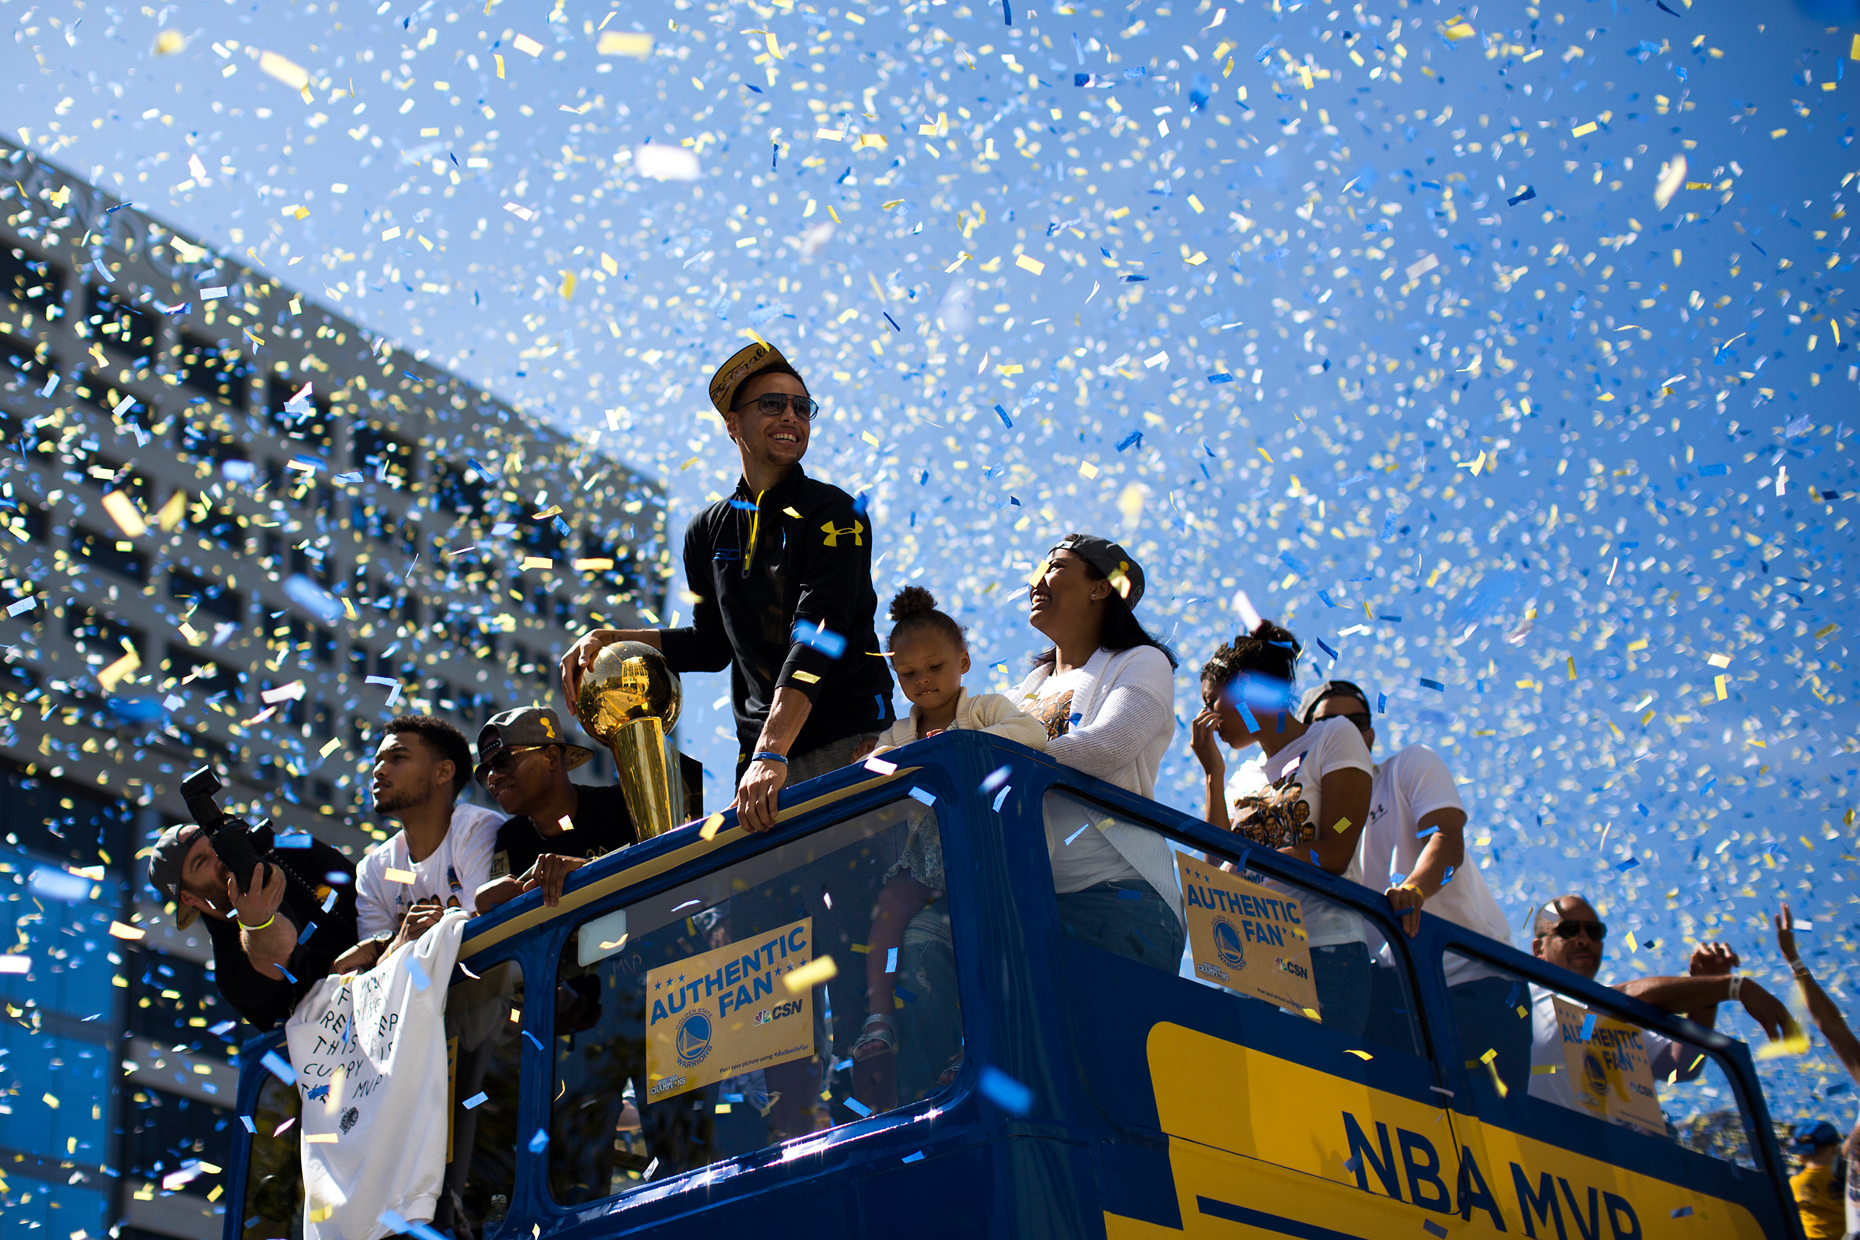 Warriors Parade in Downtown Oakland, Tuesday, June 12